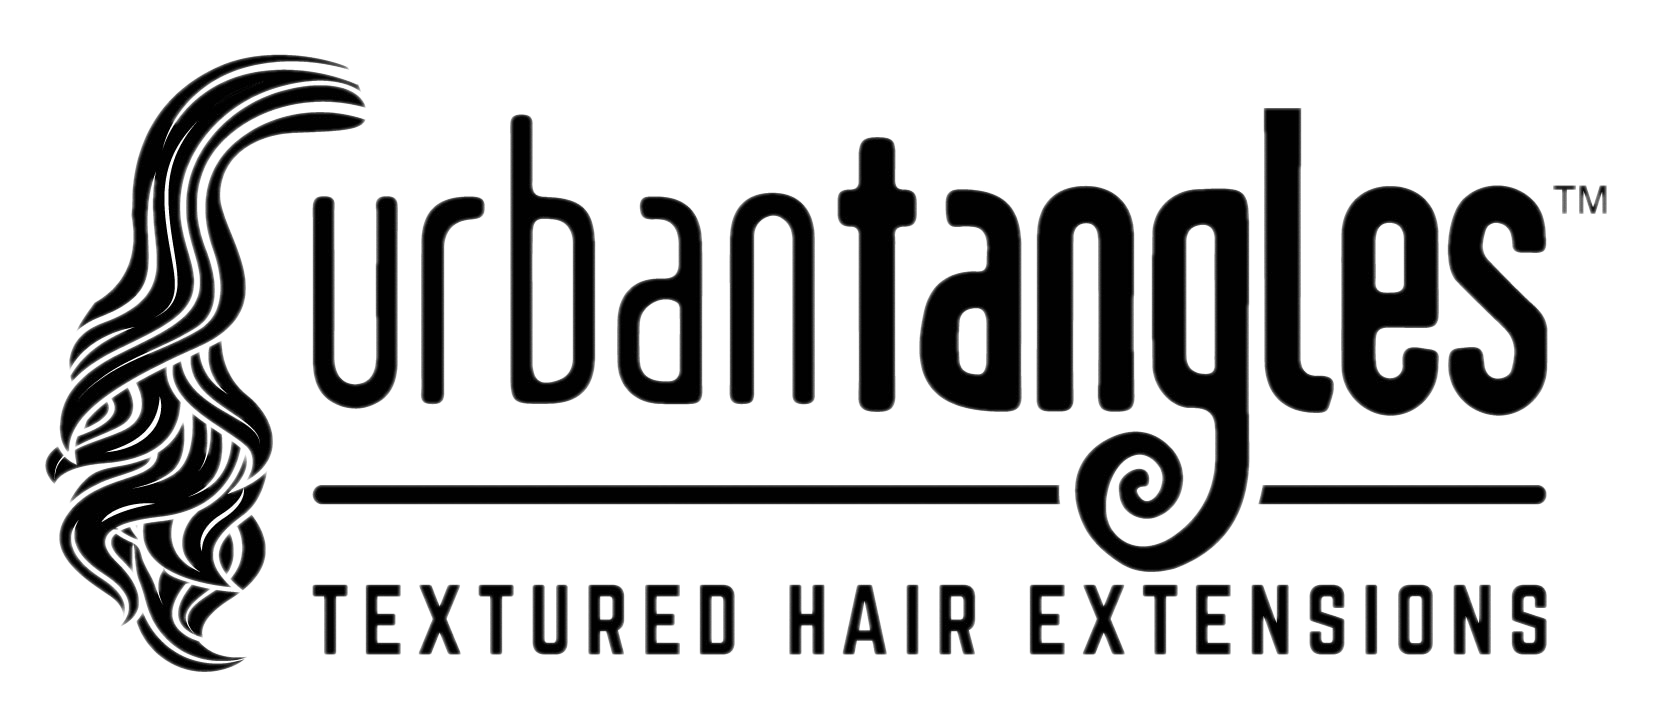 Urban Tangles Textured Hair Extensions